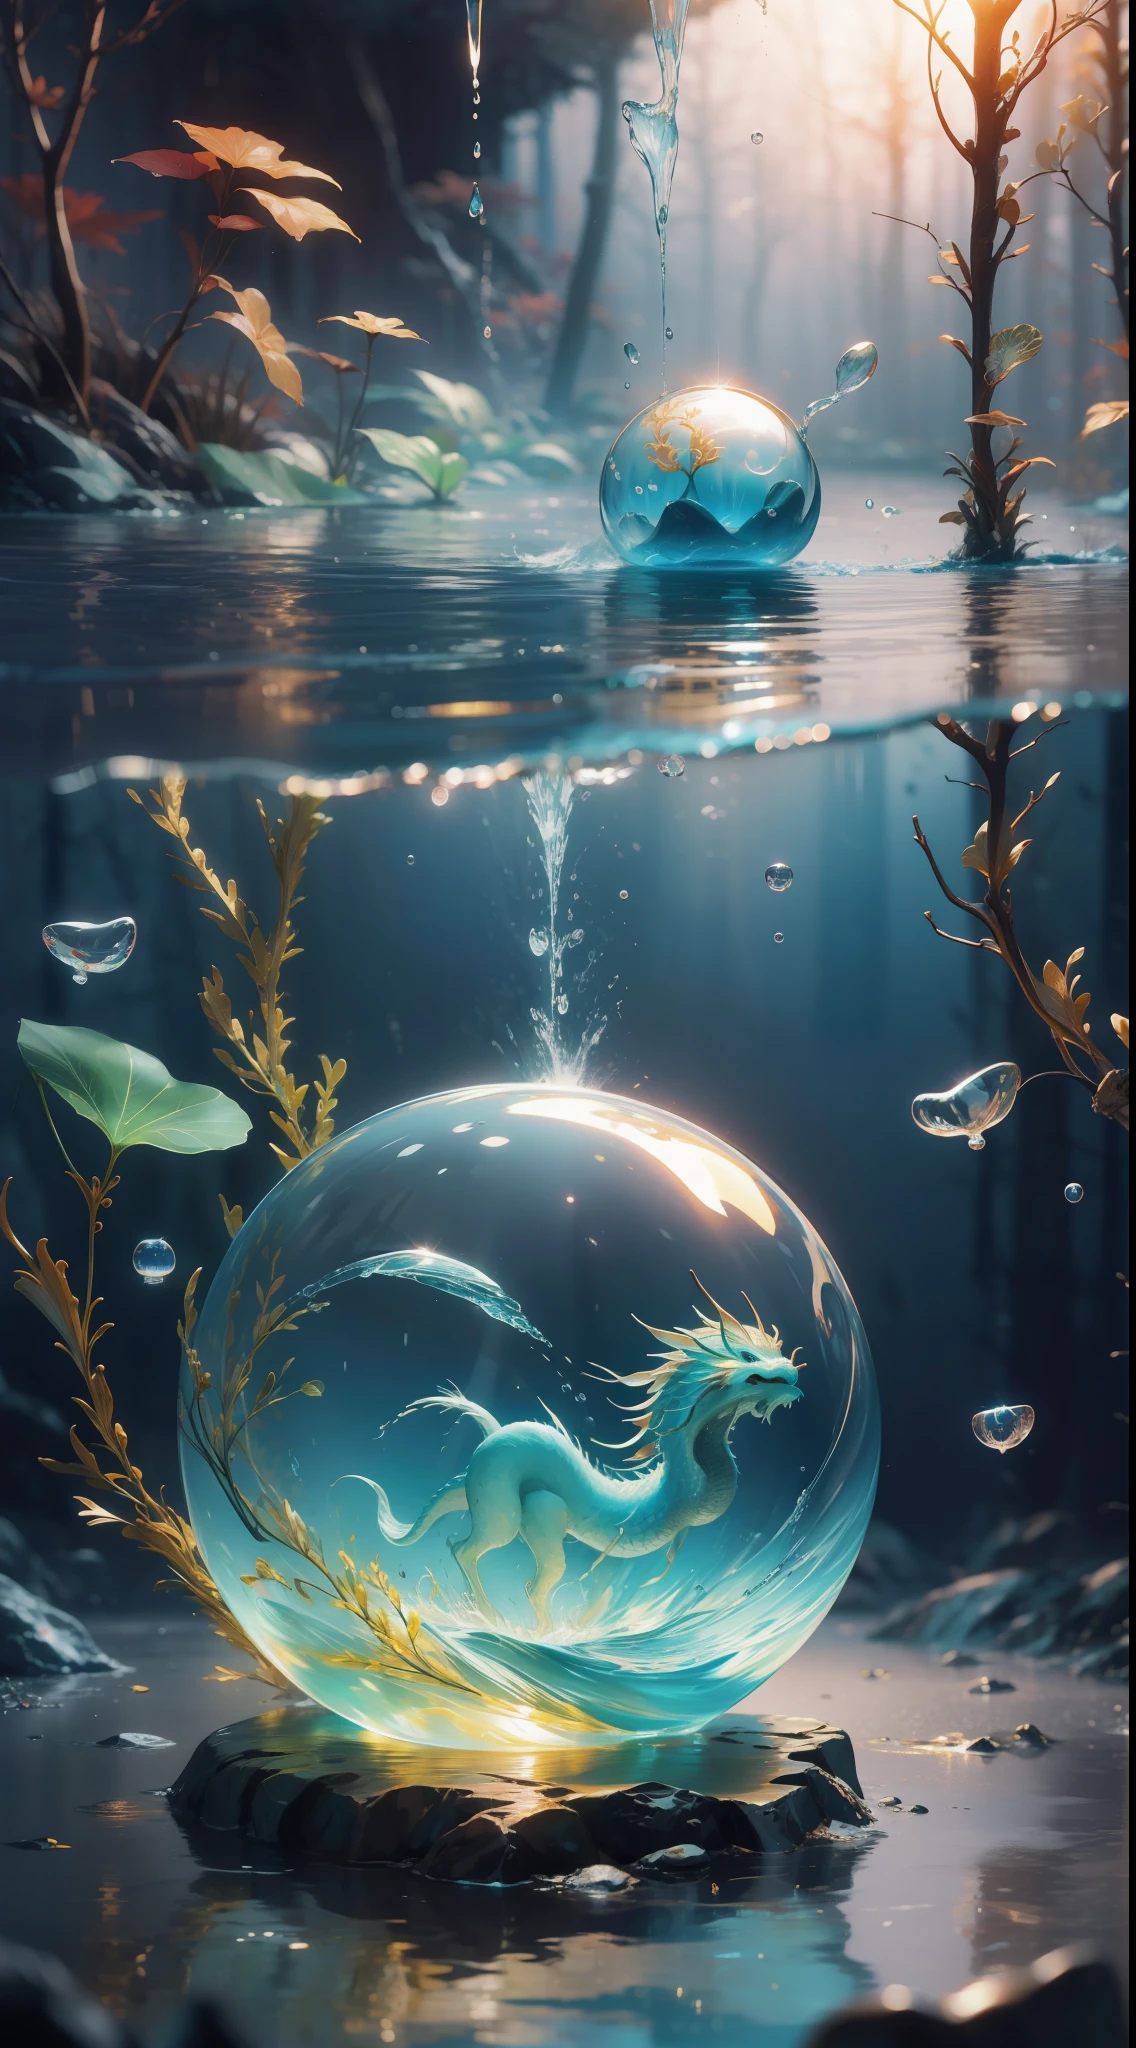 Kizi，Cute girls，((water sphere))，Wearing a Tang costume，Golden，((rainbowing))，water elemental，((vivd colour))，Water quality sense，Magical Circle，water sphere，water dragon，(((Kizi)))，Textures are diverse， chinese dragon concept art， Anime art wallpaper 8 K， anime artsyle， Detailed anime artwork，Epic composition，Realistic lighting，high definition detail，tmasterpiece，Best quality，